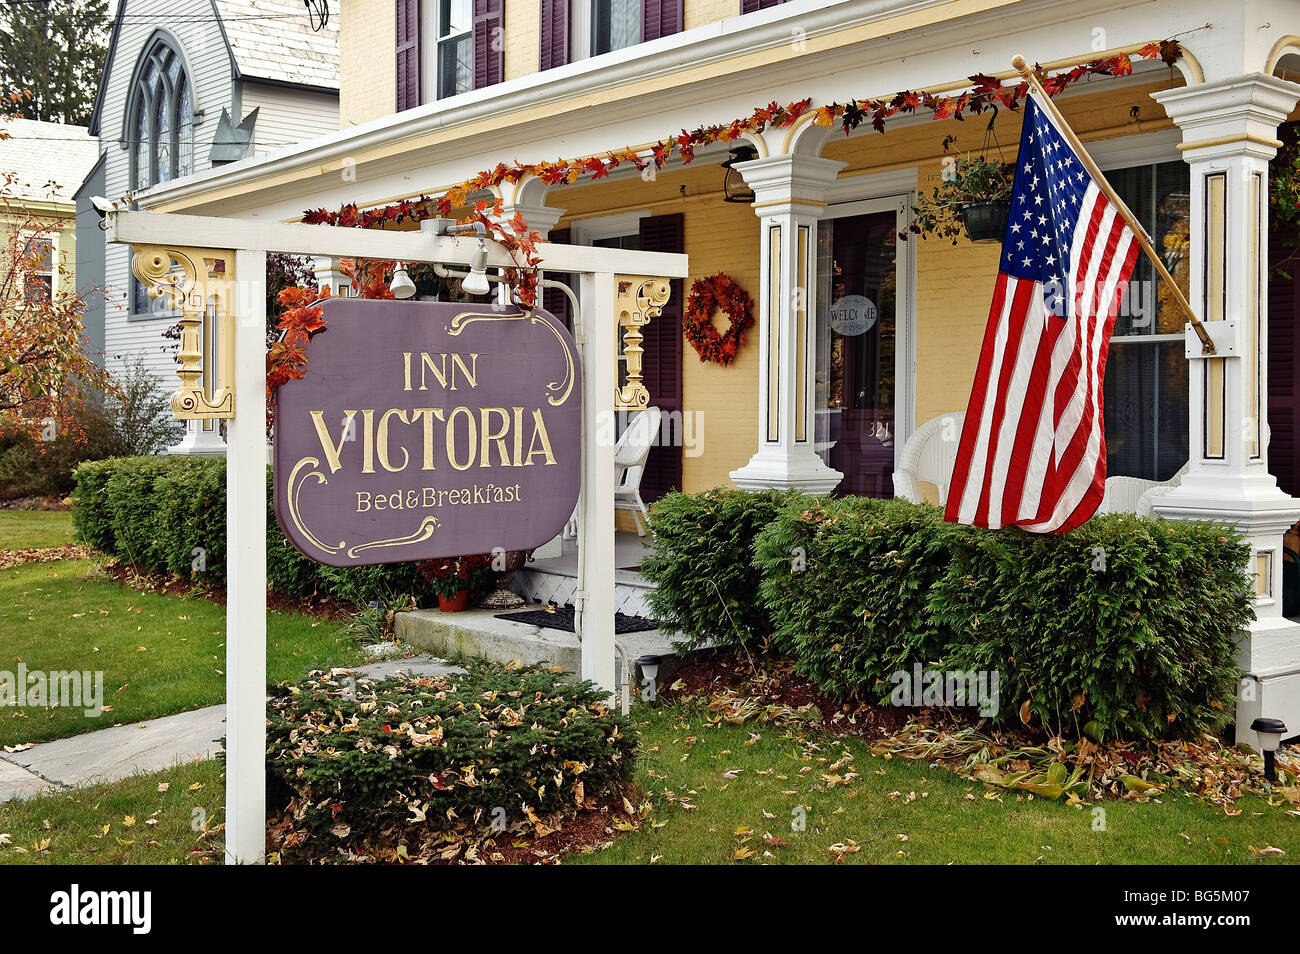 Bed & breakfast, Chester, Vermont, USA Stock Photo